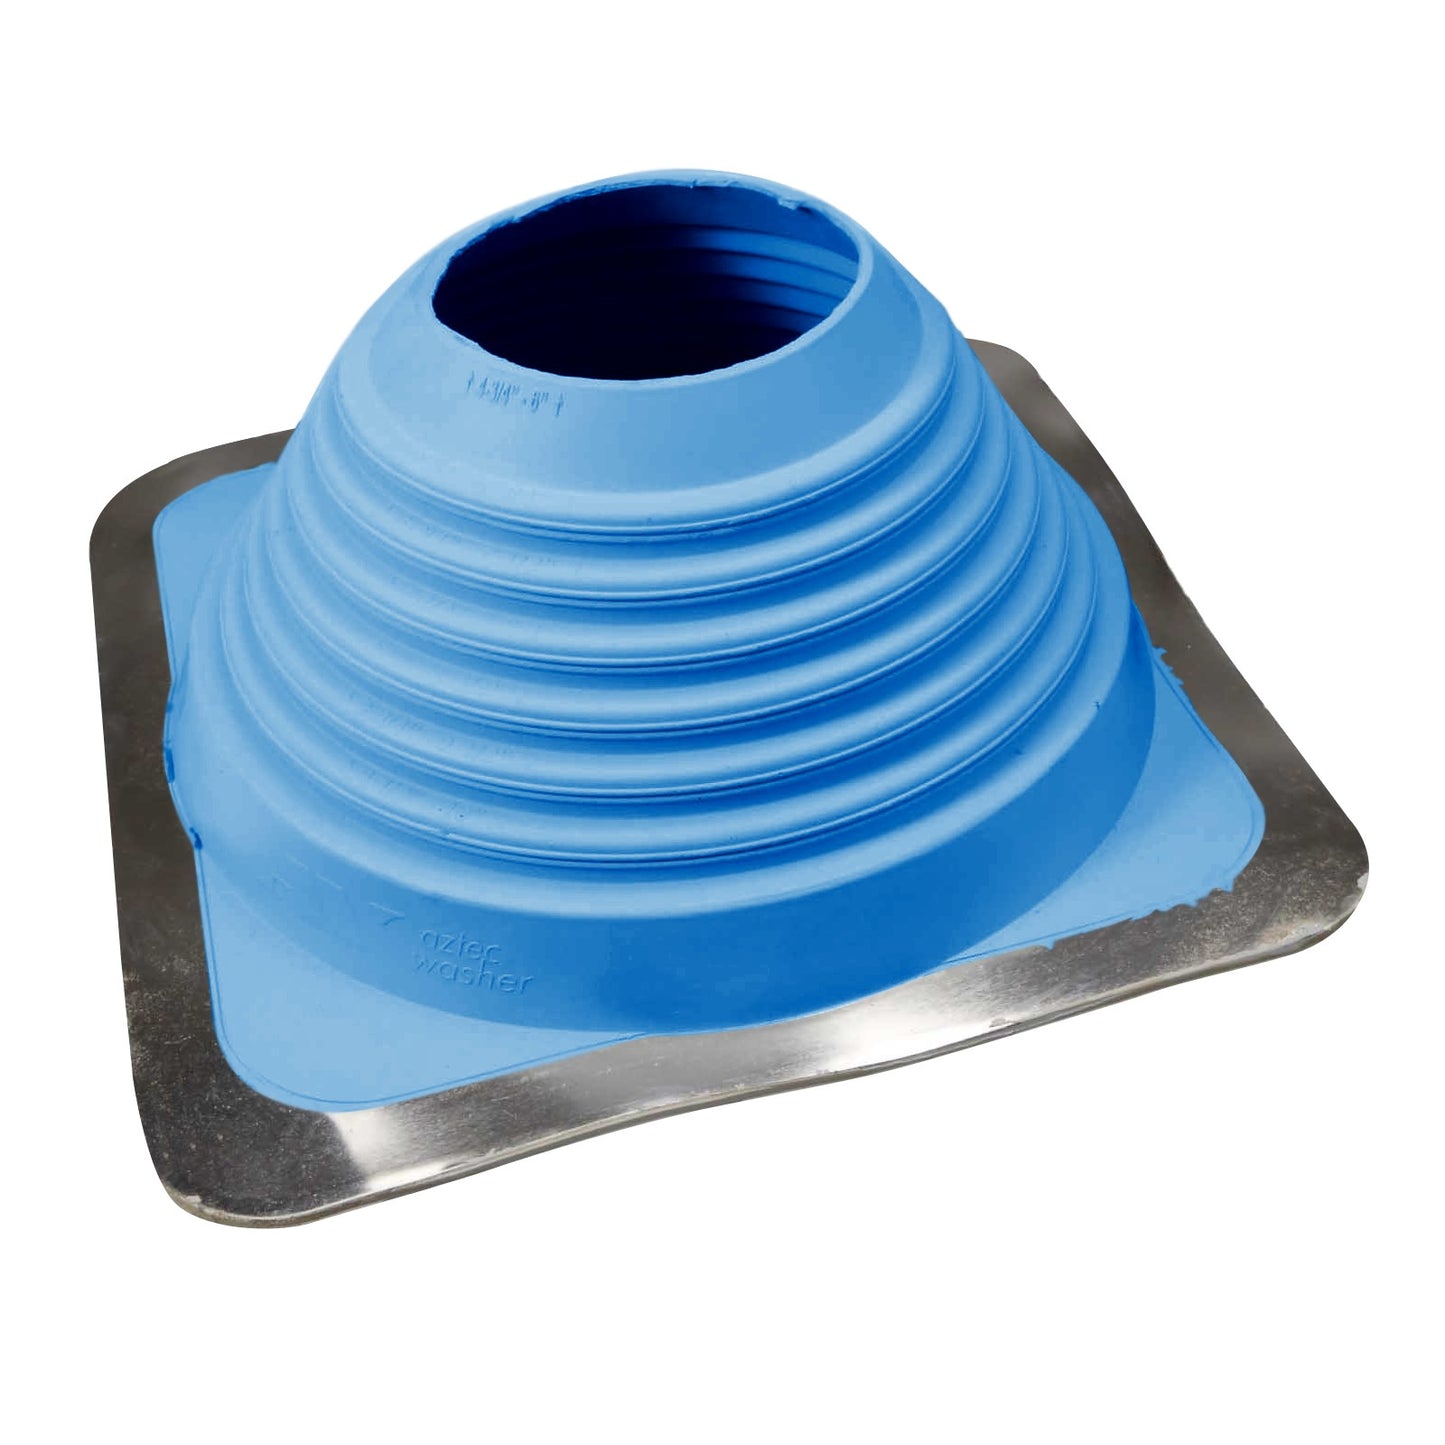 #6 Roofjack Square EPDM Pipe Flashing Boot Light Blue